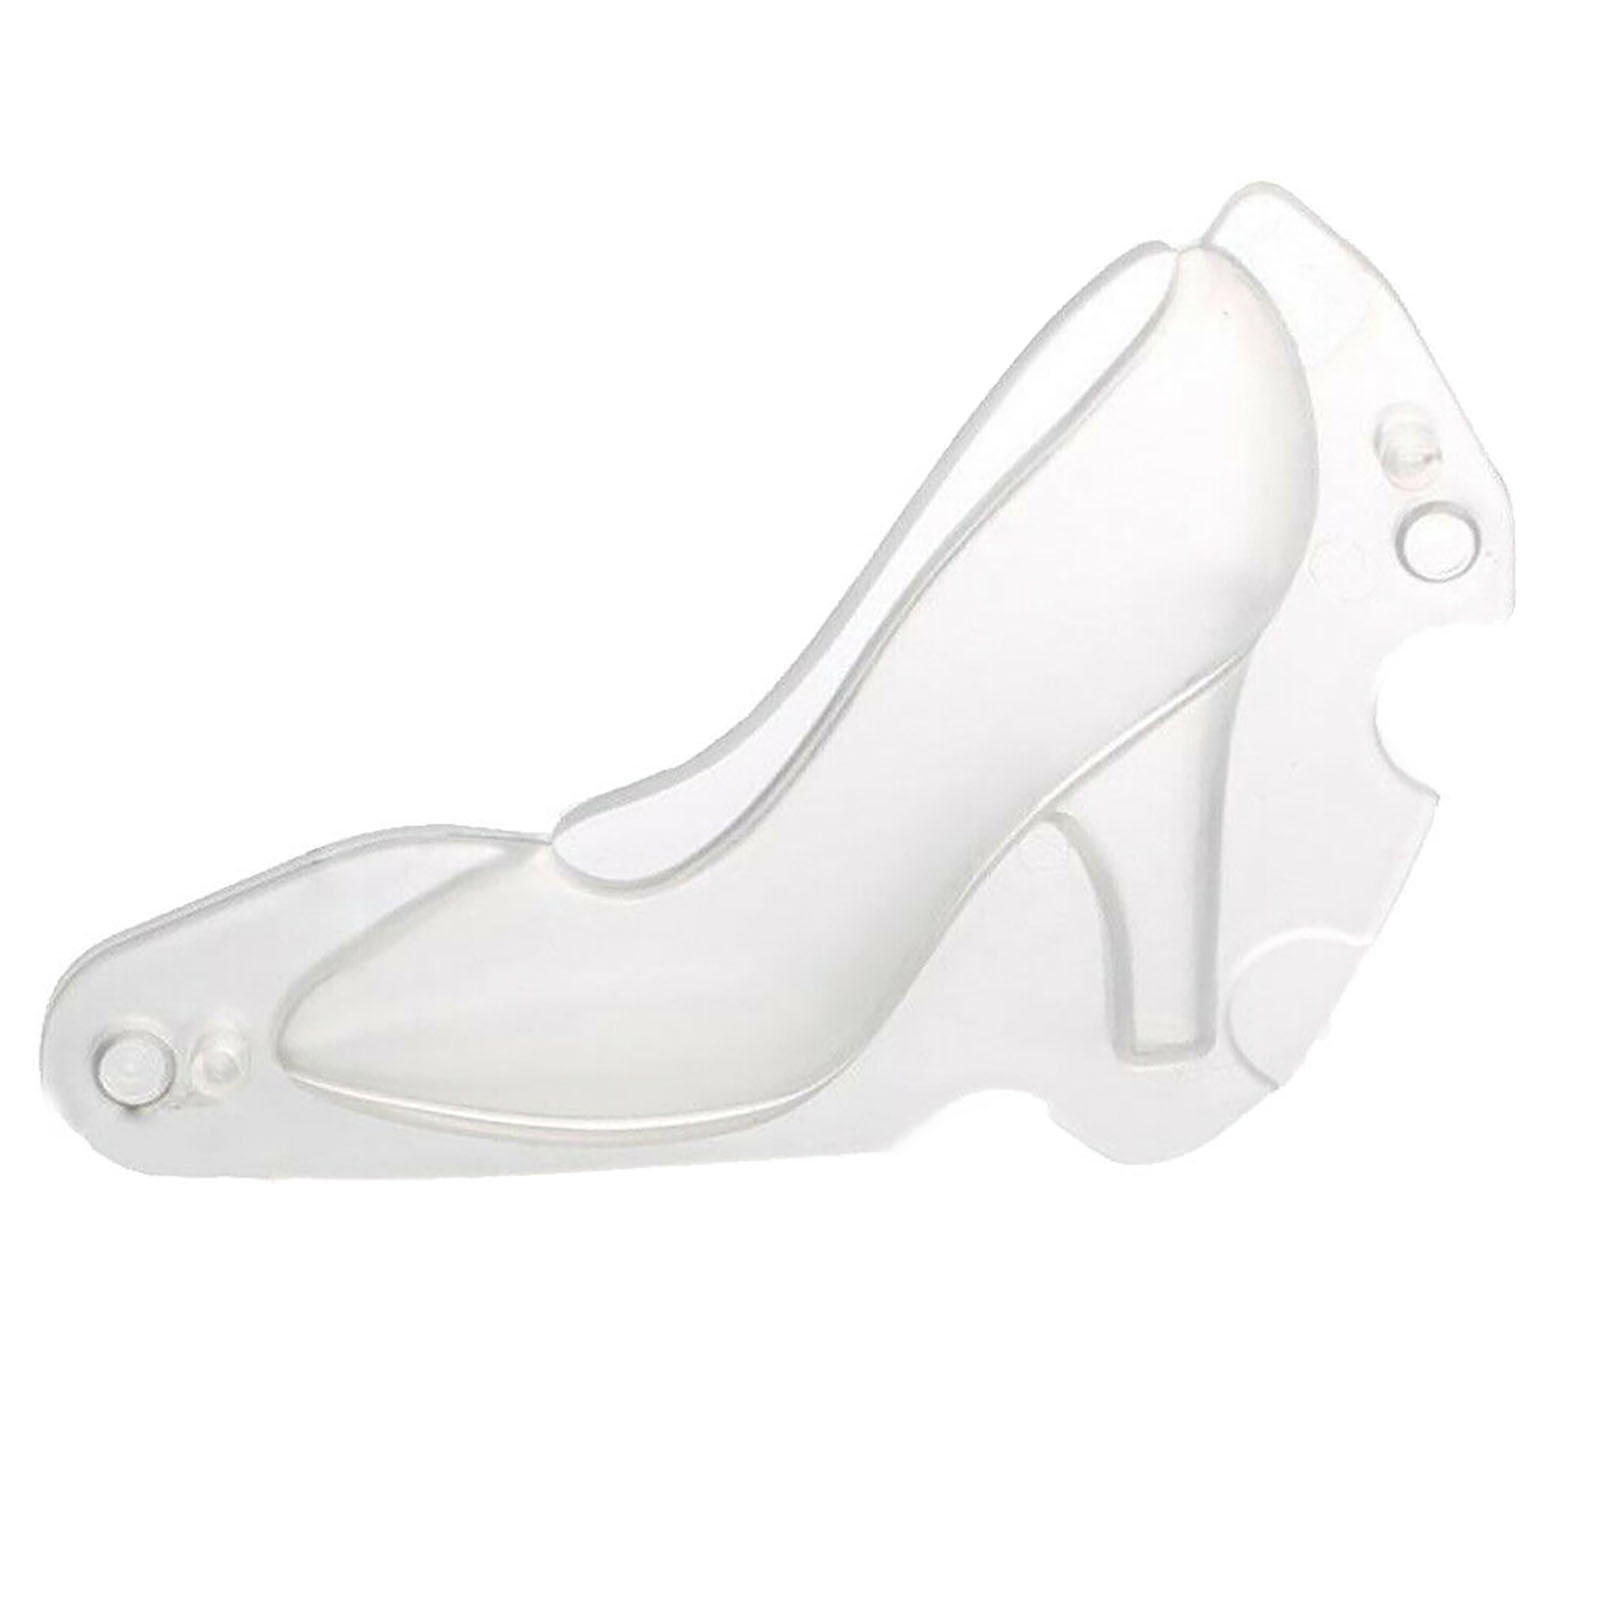 DIY 3D Chocolate Mold High Heel Shoes Candy Cake Decoration Molds Cake Tools